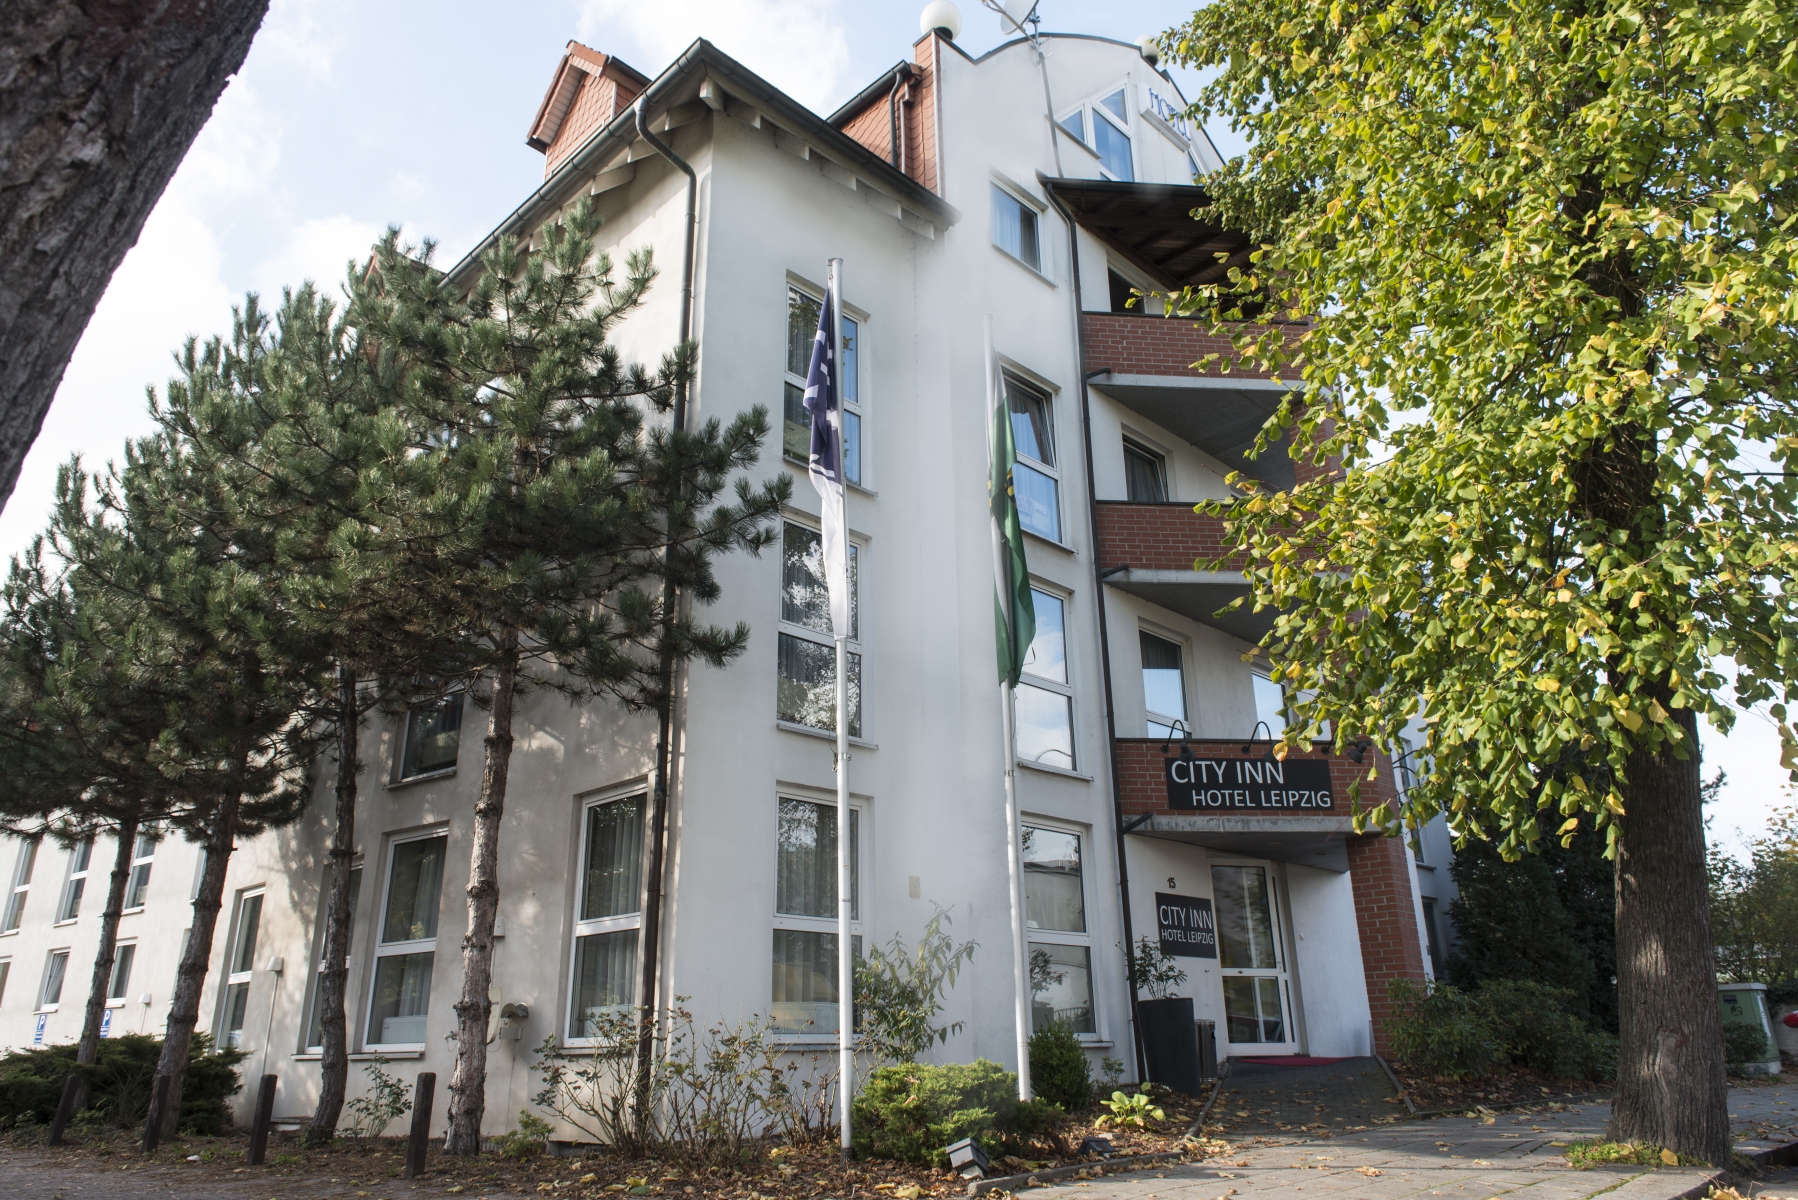 City INN Hotel Leipzig <br/>41.40 ew <br/> <a href='http://vakantieoplossing.nl/outpage/?id=ee73738d58bac04ceb2235e107a16bc1' target='_blank'>View Details</a>